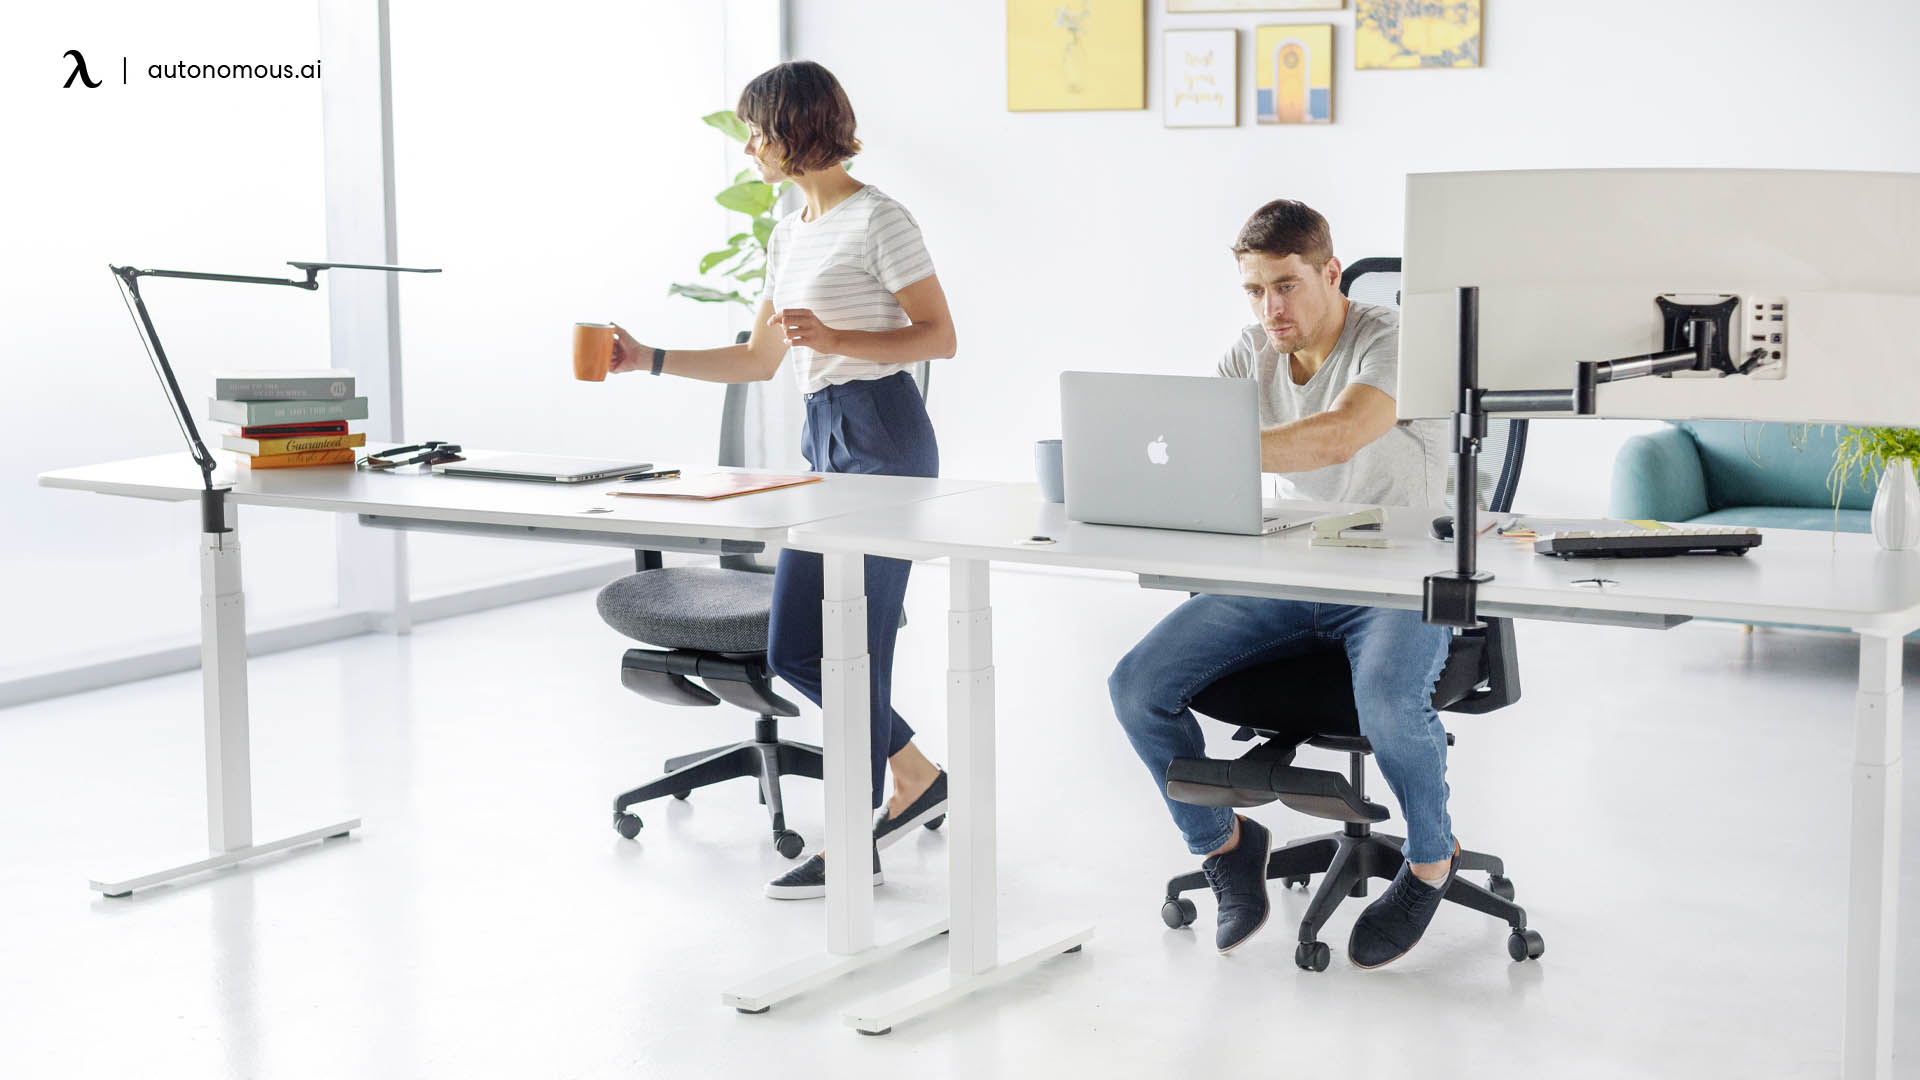 Photo of chairs and standing desks